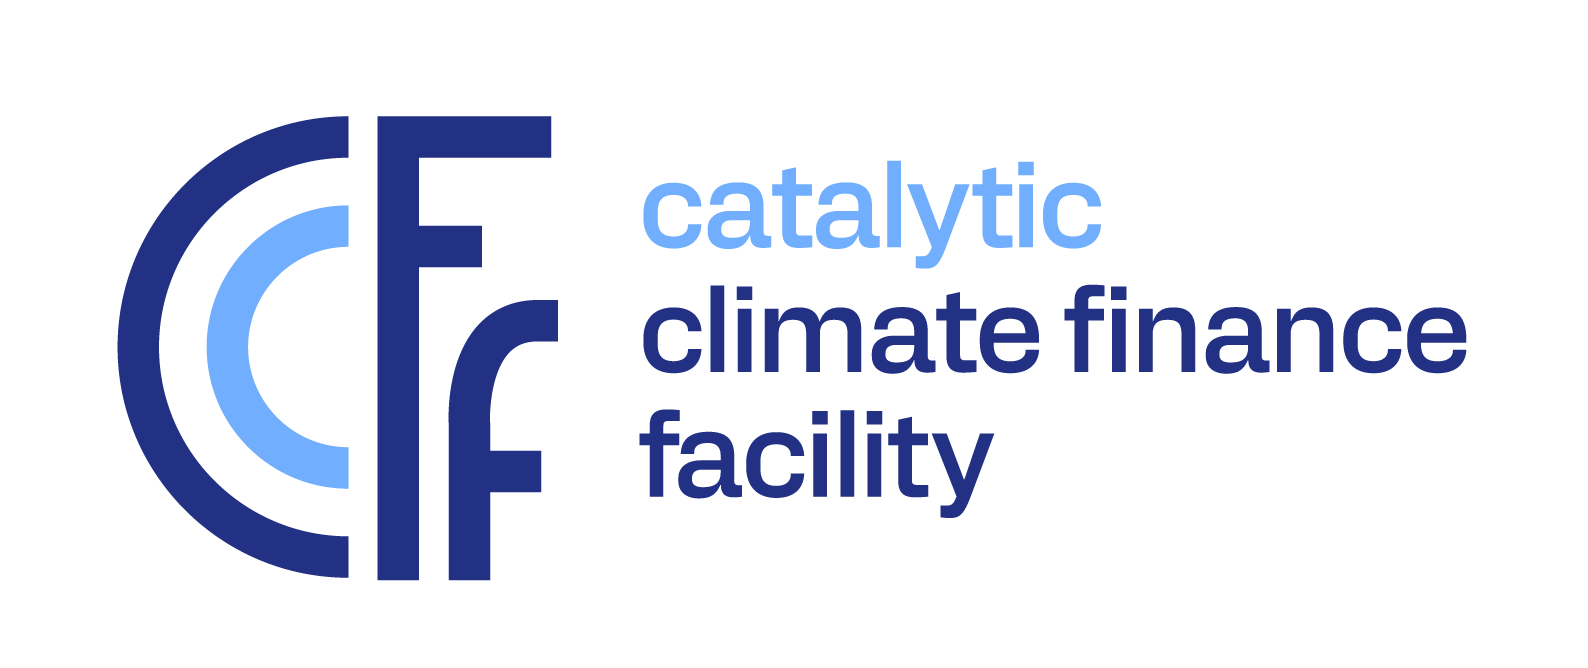 Catalytic Climate Finance Facility | Convergence